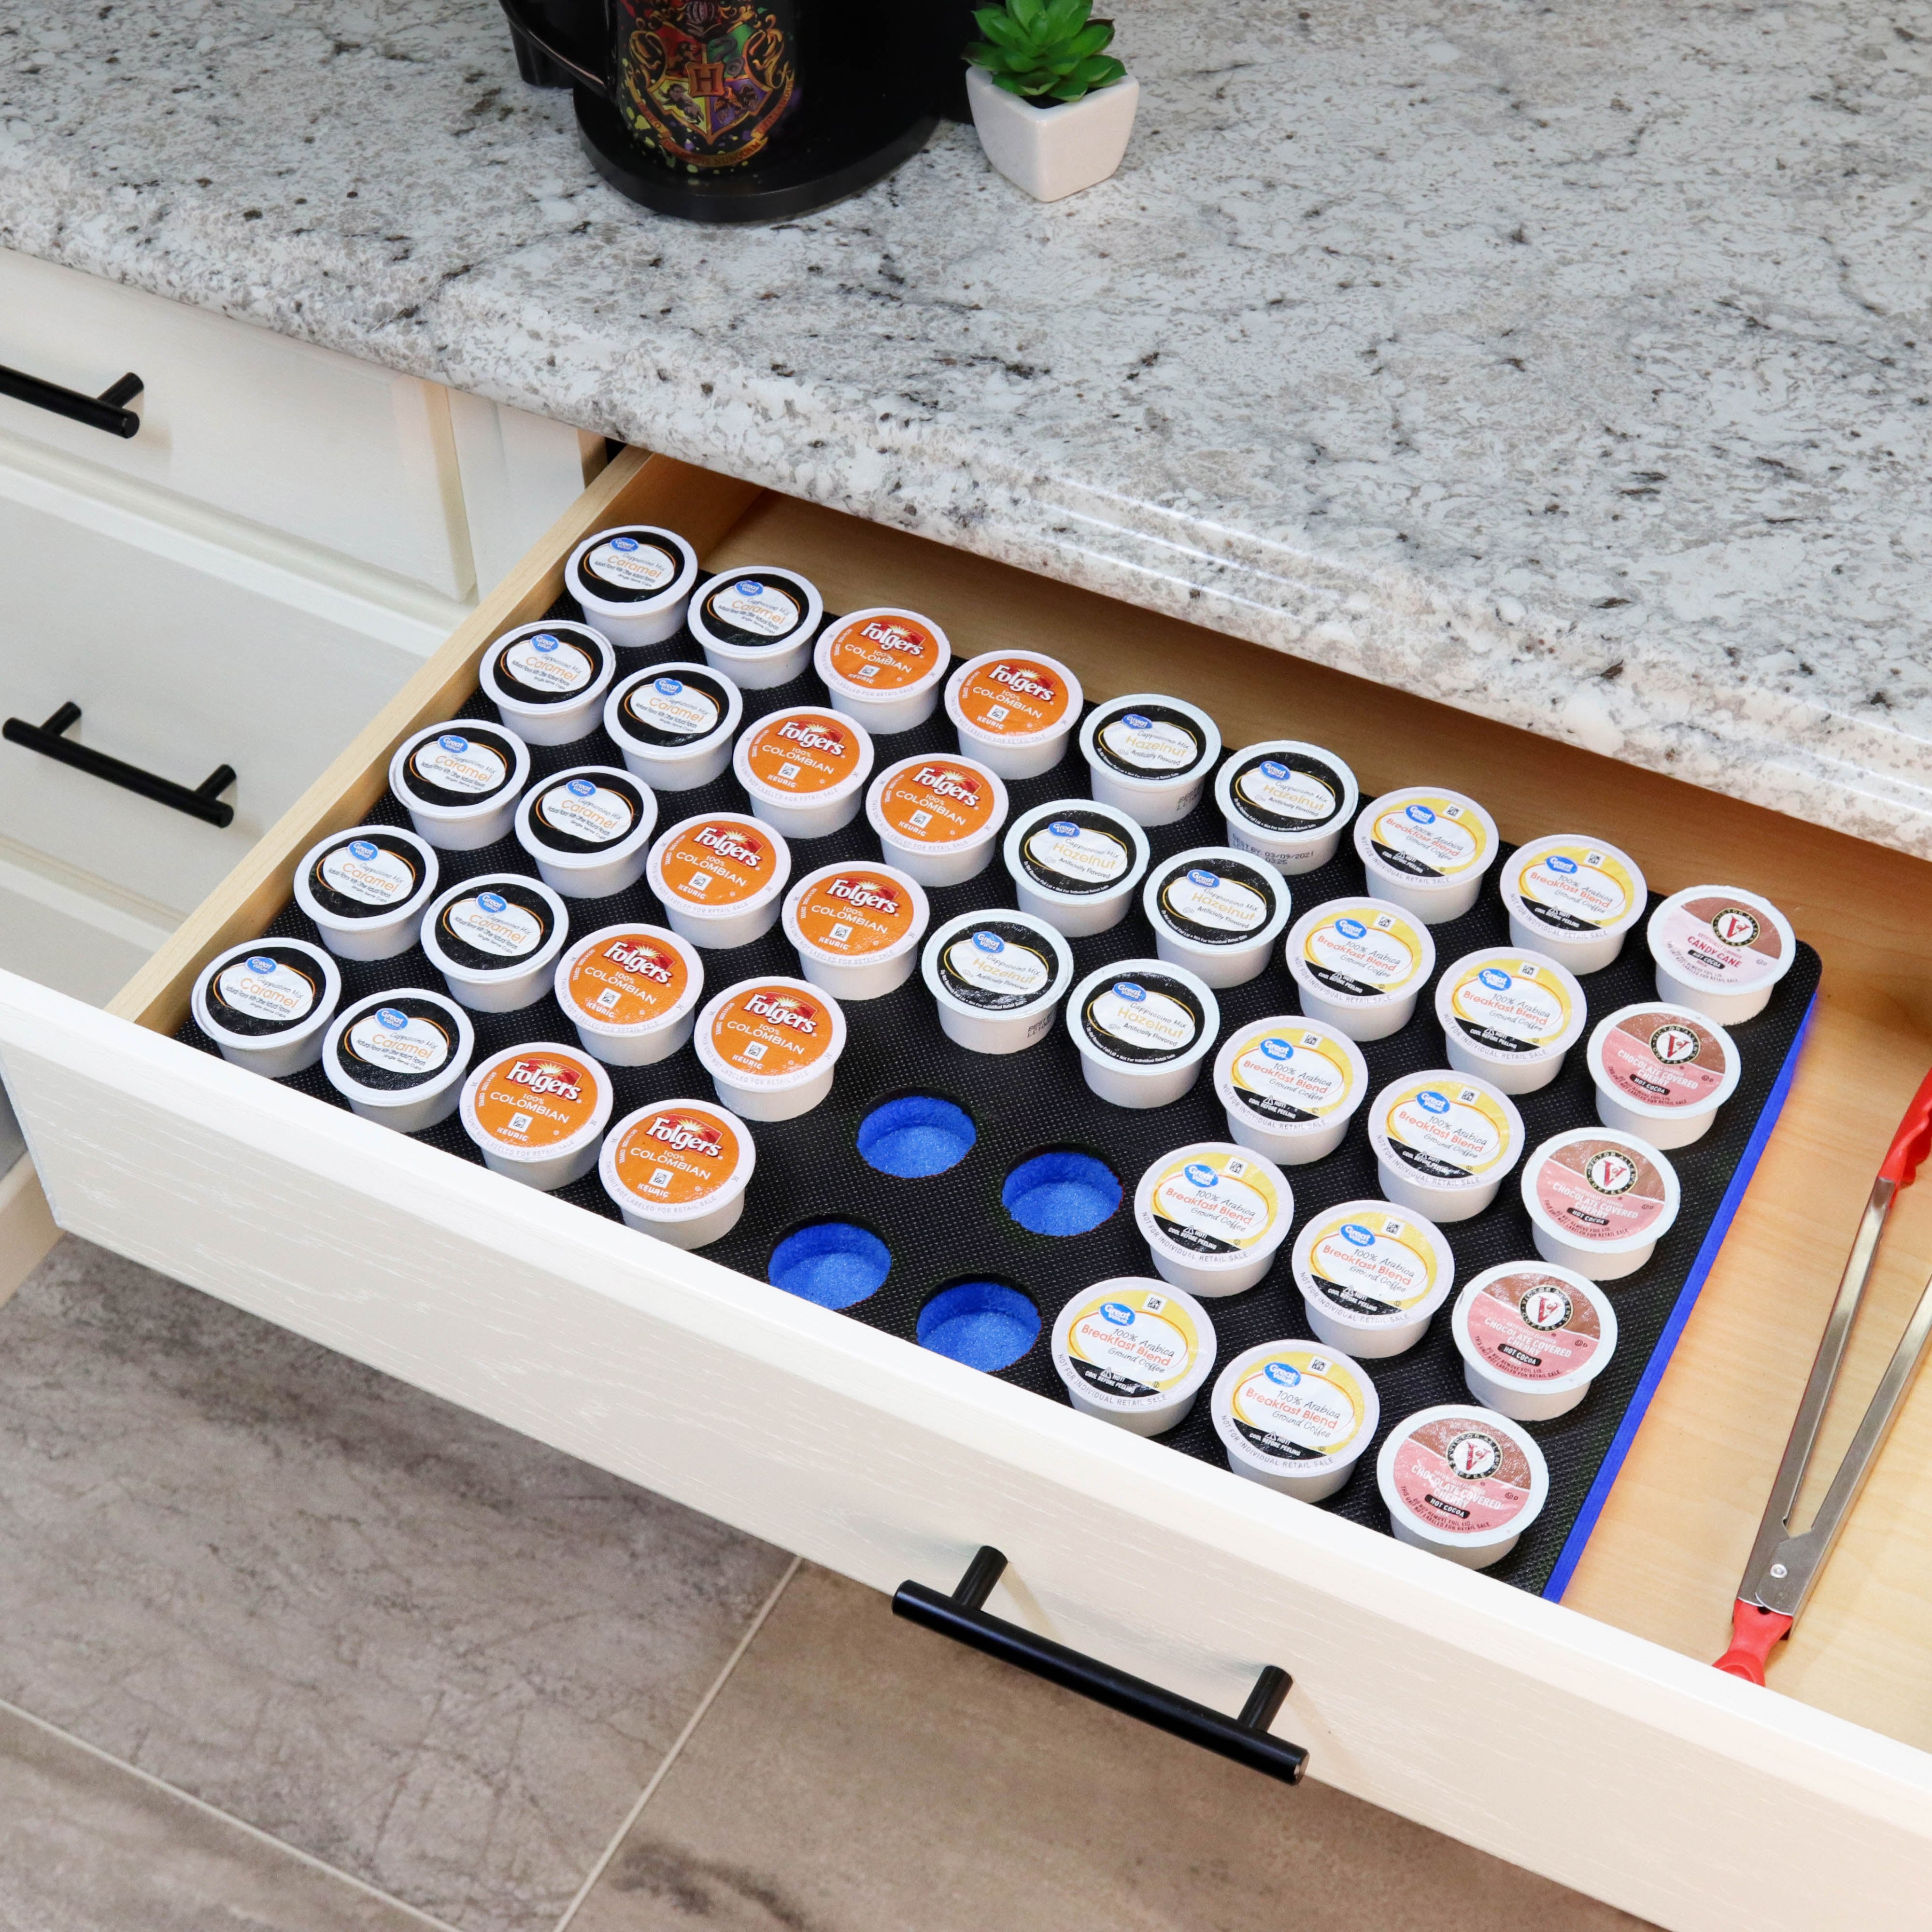 Coffee Pod Storage Deluxe Organizer Tray Drawer Insert for Kitchen Home Office Waterproof 12.1 X 19.9 Inches Holds 45 Compatible Keurig K-Cup